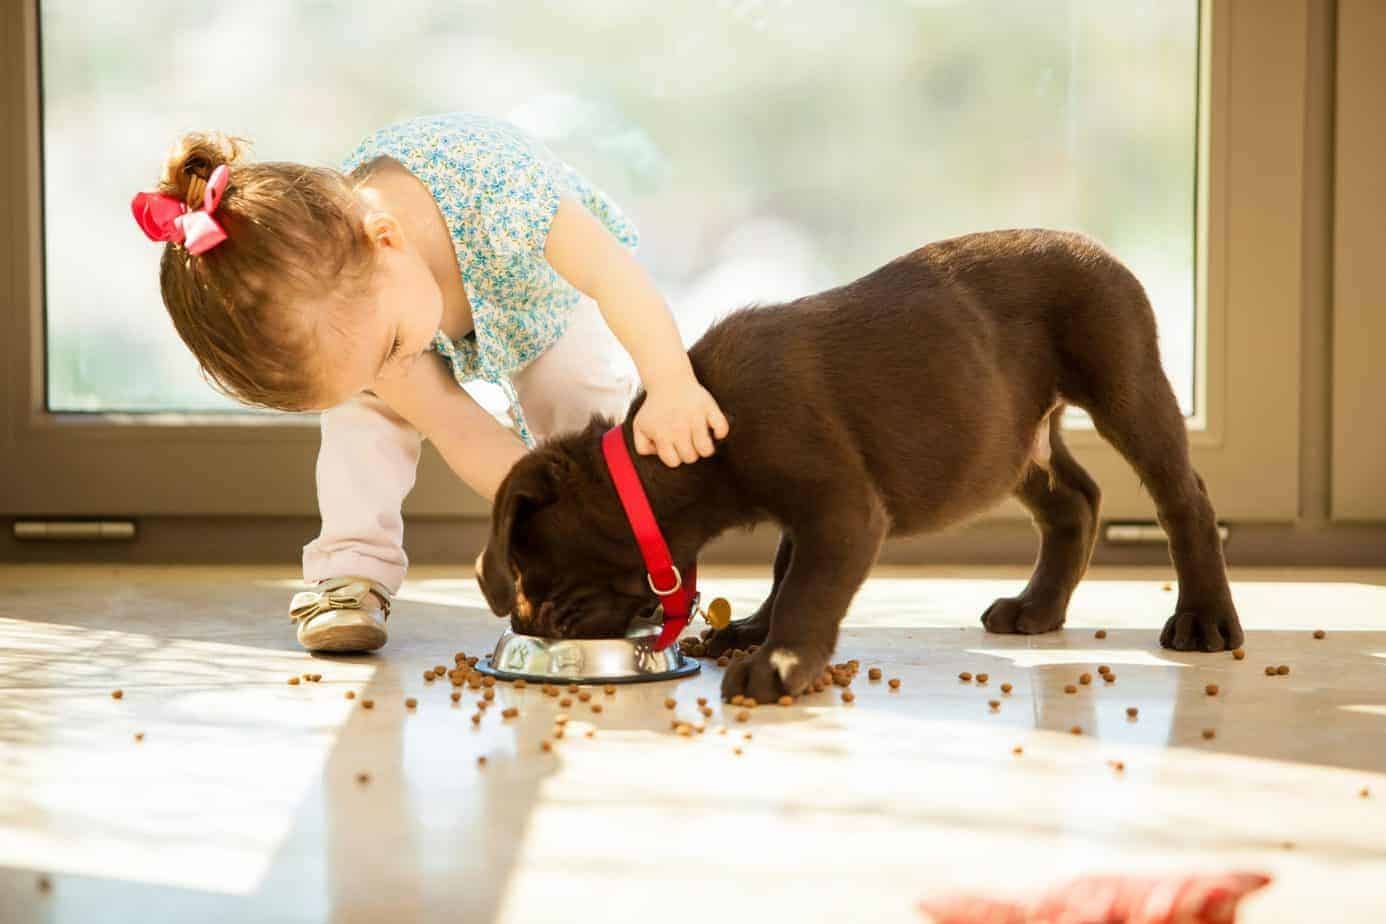 Dogs teach kids responsibility, socialization, love, and friendship